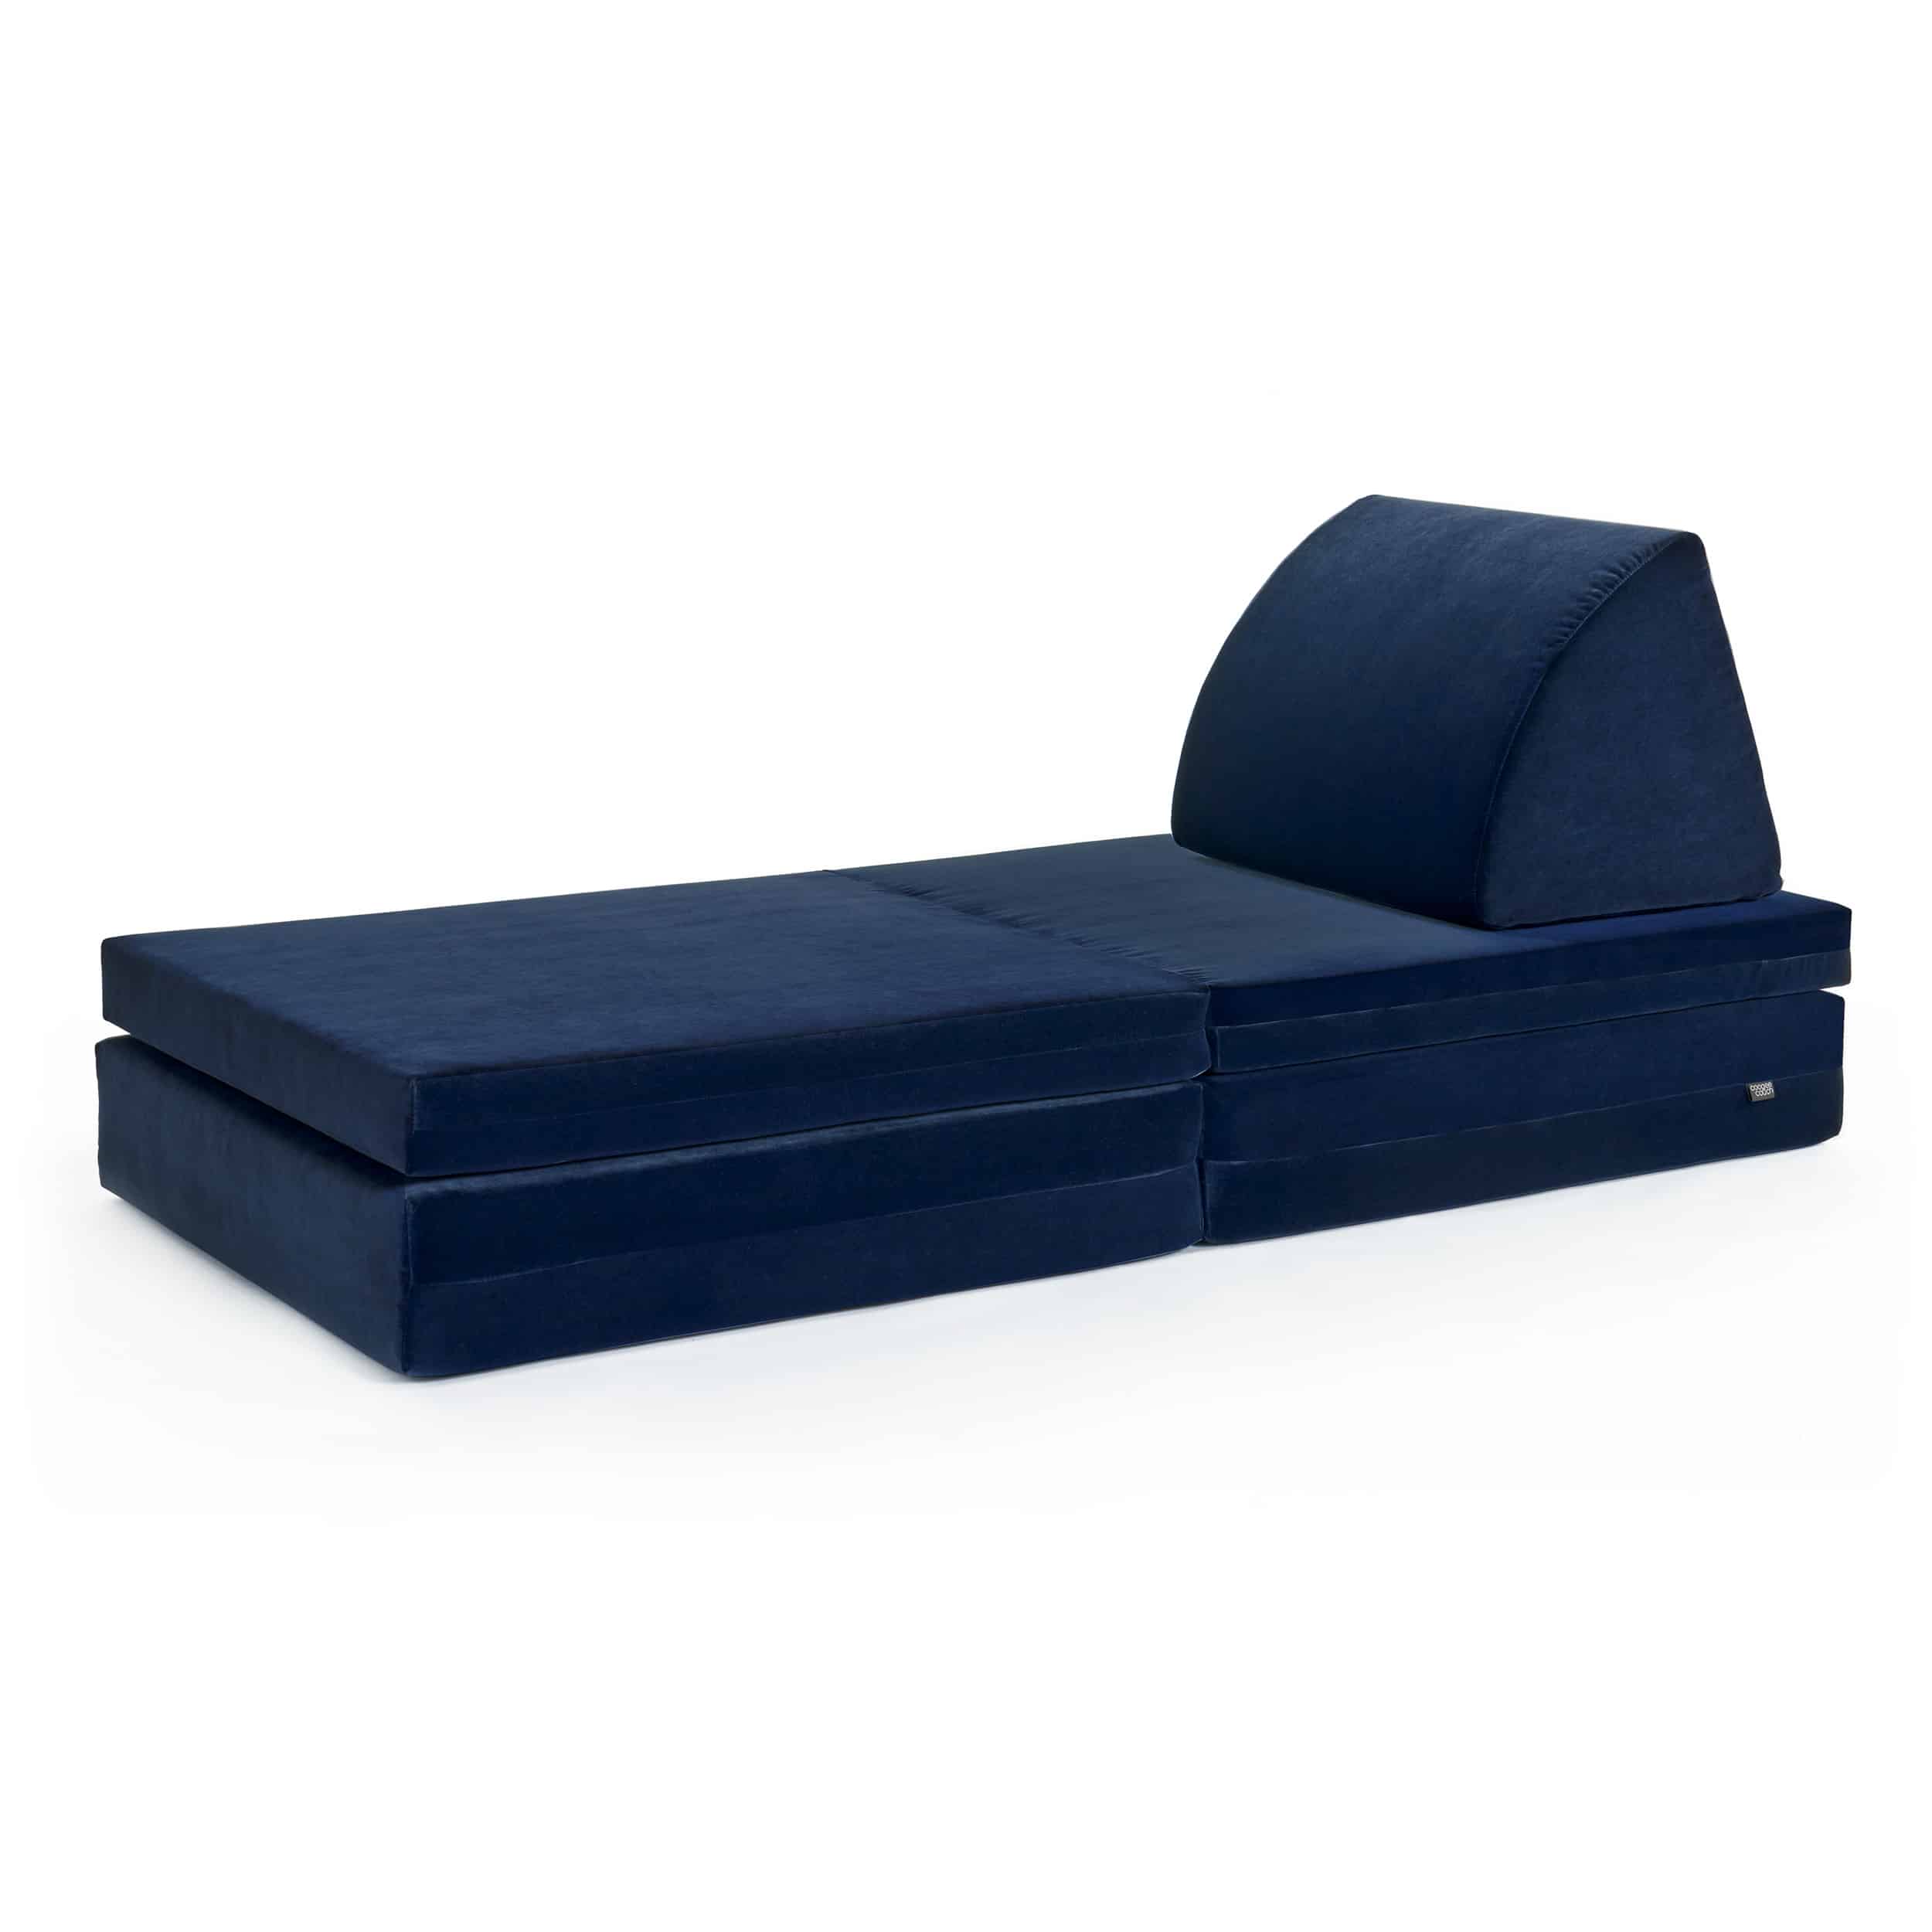 coogeecouch | children's sofa | series: youniverse | color: night-blue dark construction | view: front couch | made in Germany